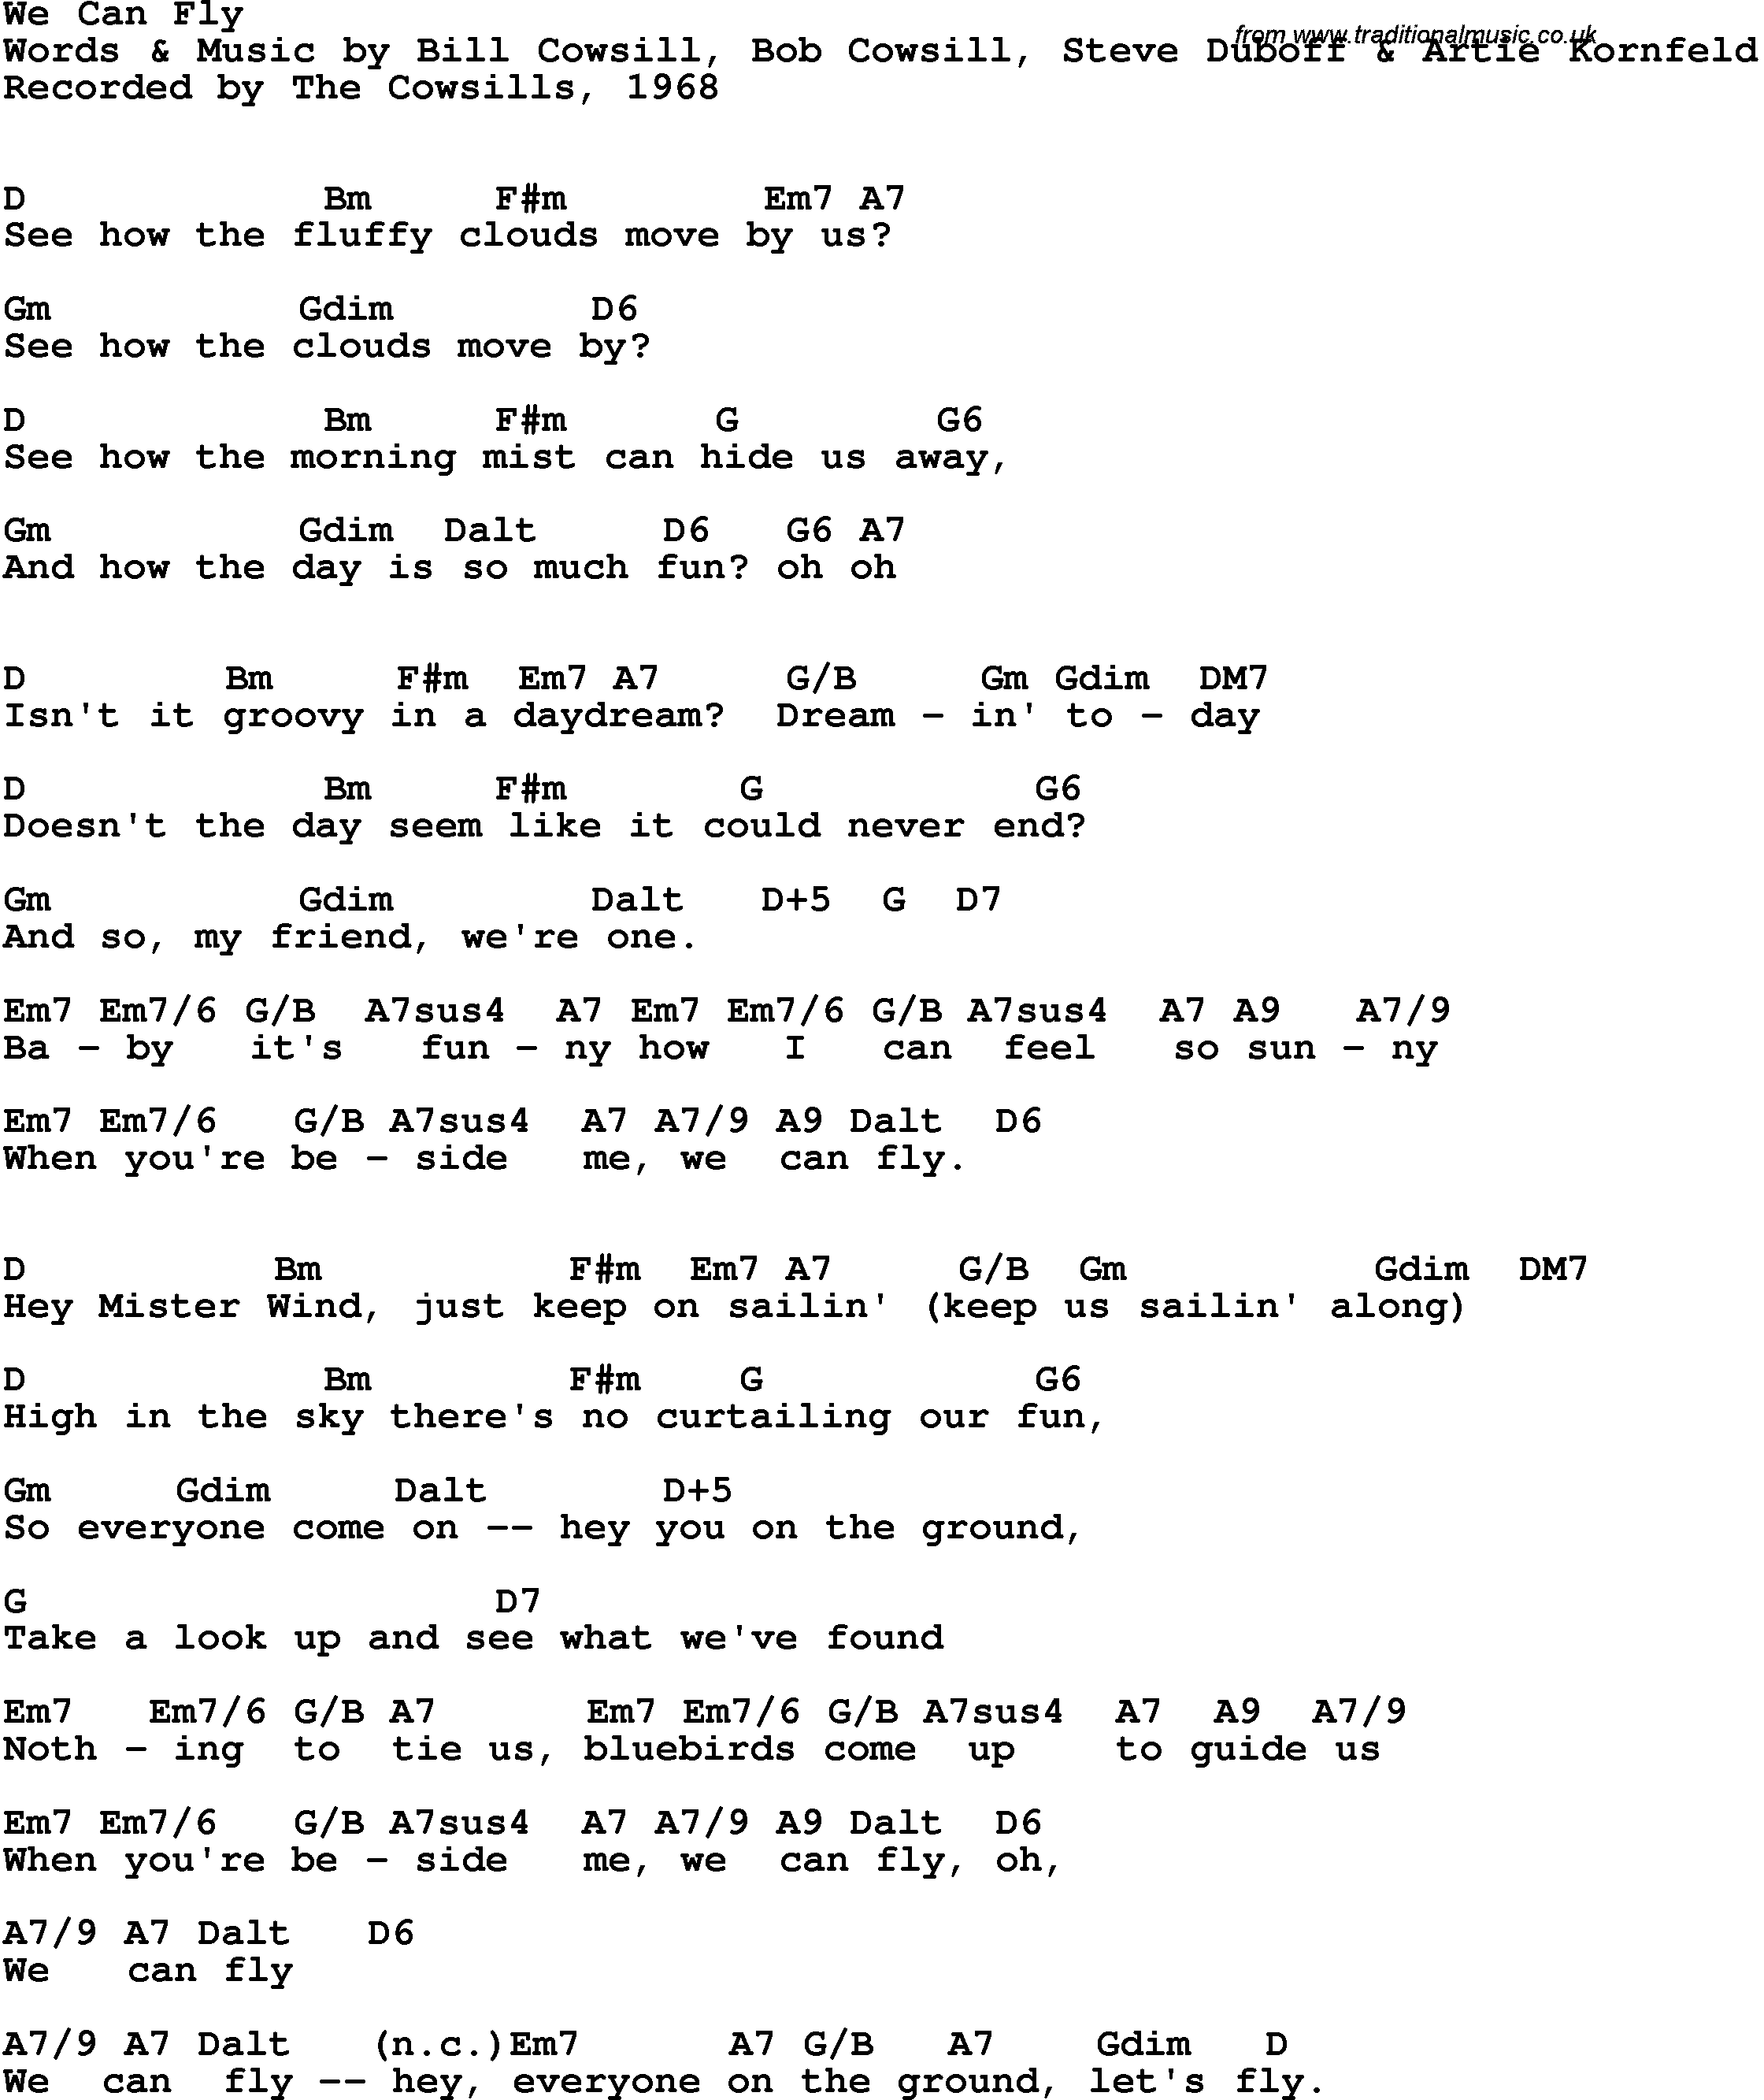 Song Lyrics with guitar chords for We Can Fly - The Cowsills, 1968